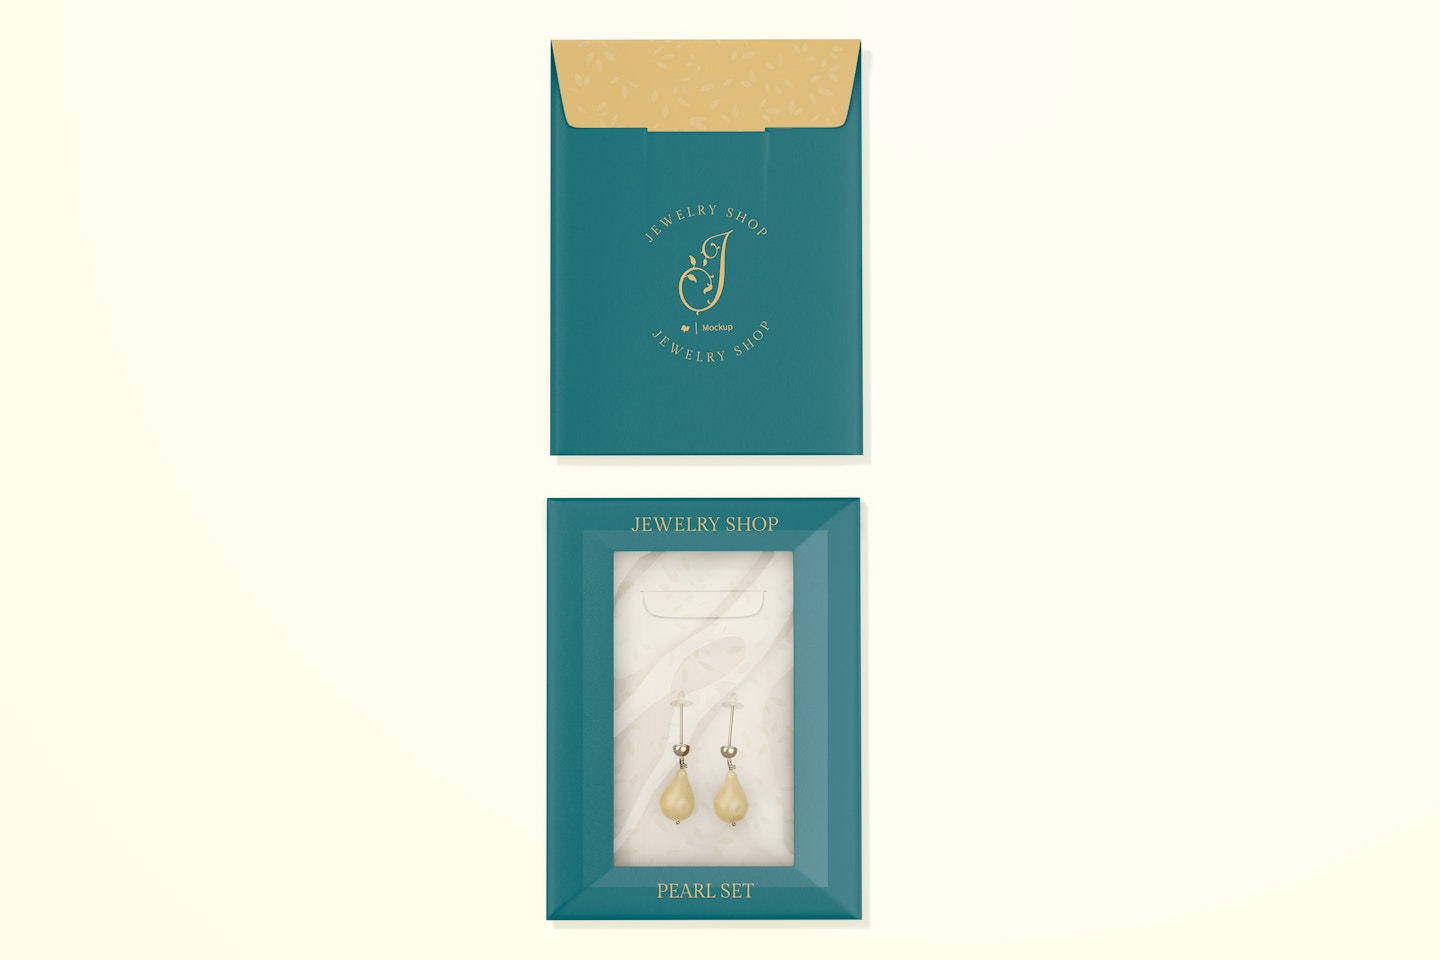 Envelope for Jewelry Mockup, Top View